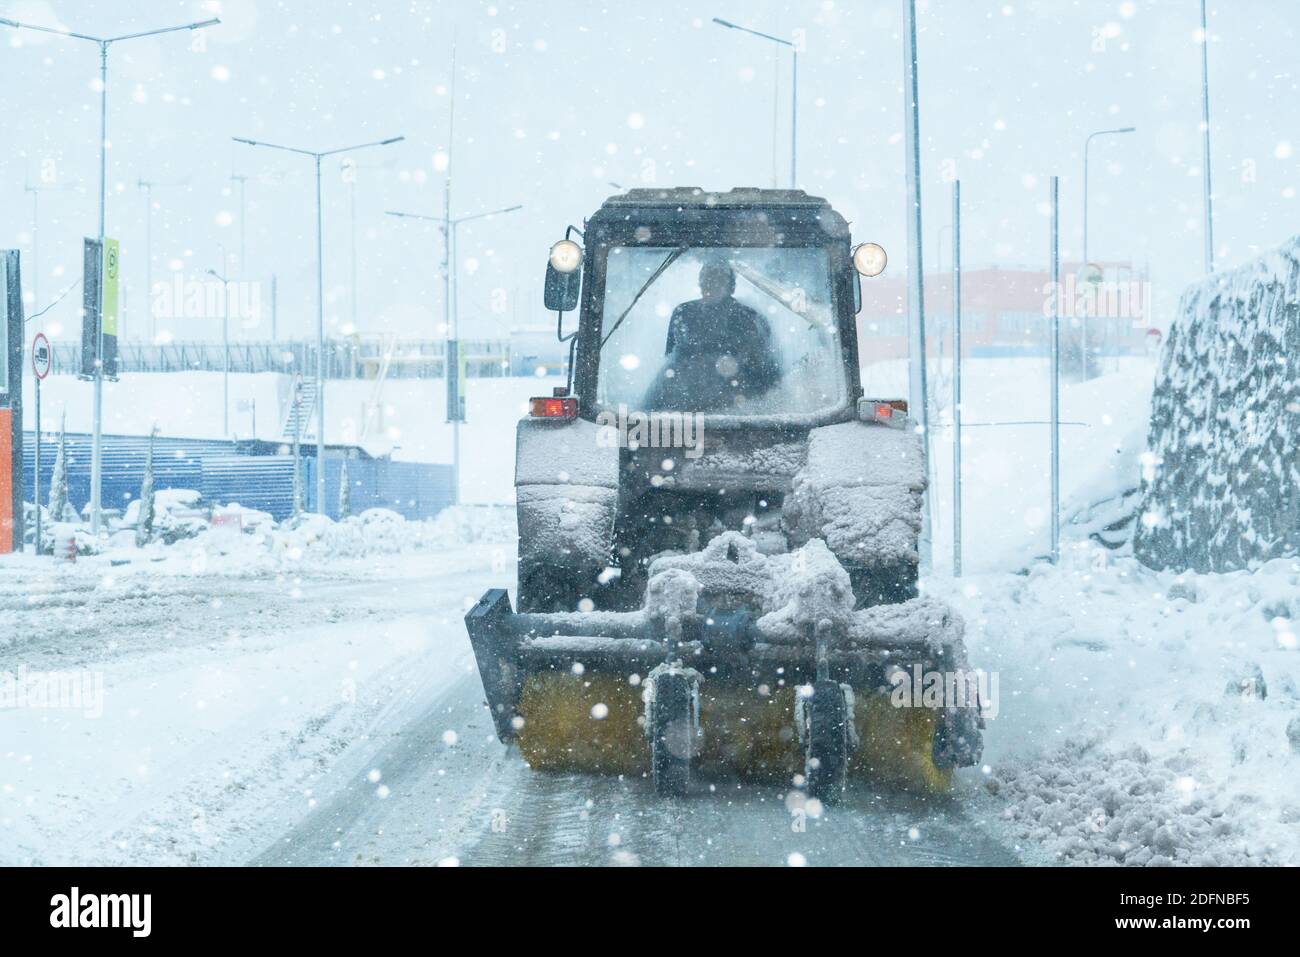 Snow blower removes snow from the sidewalk Stock Photo